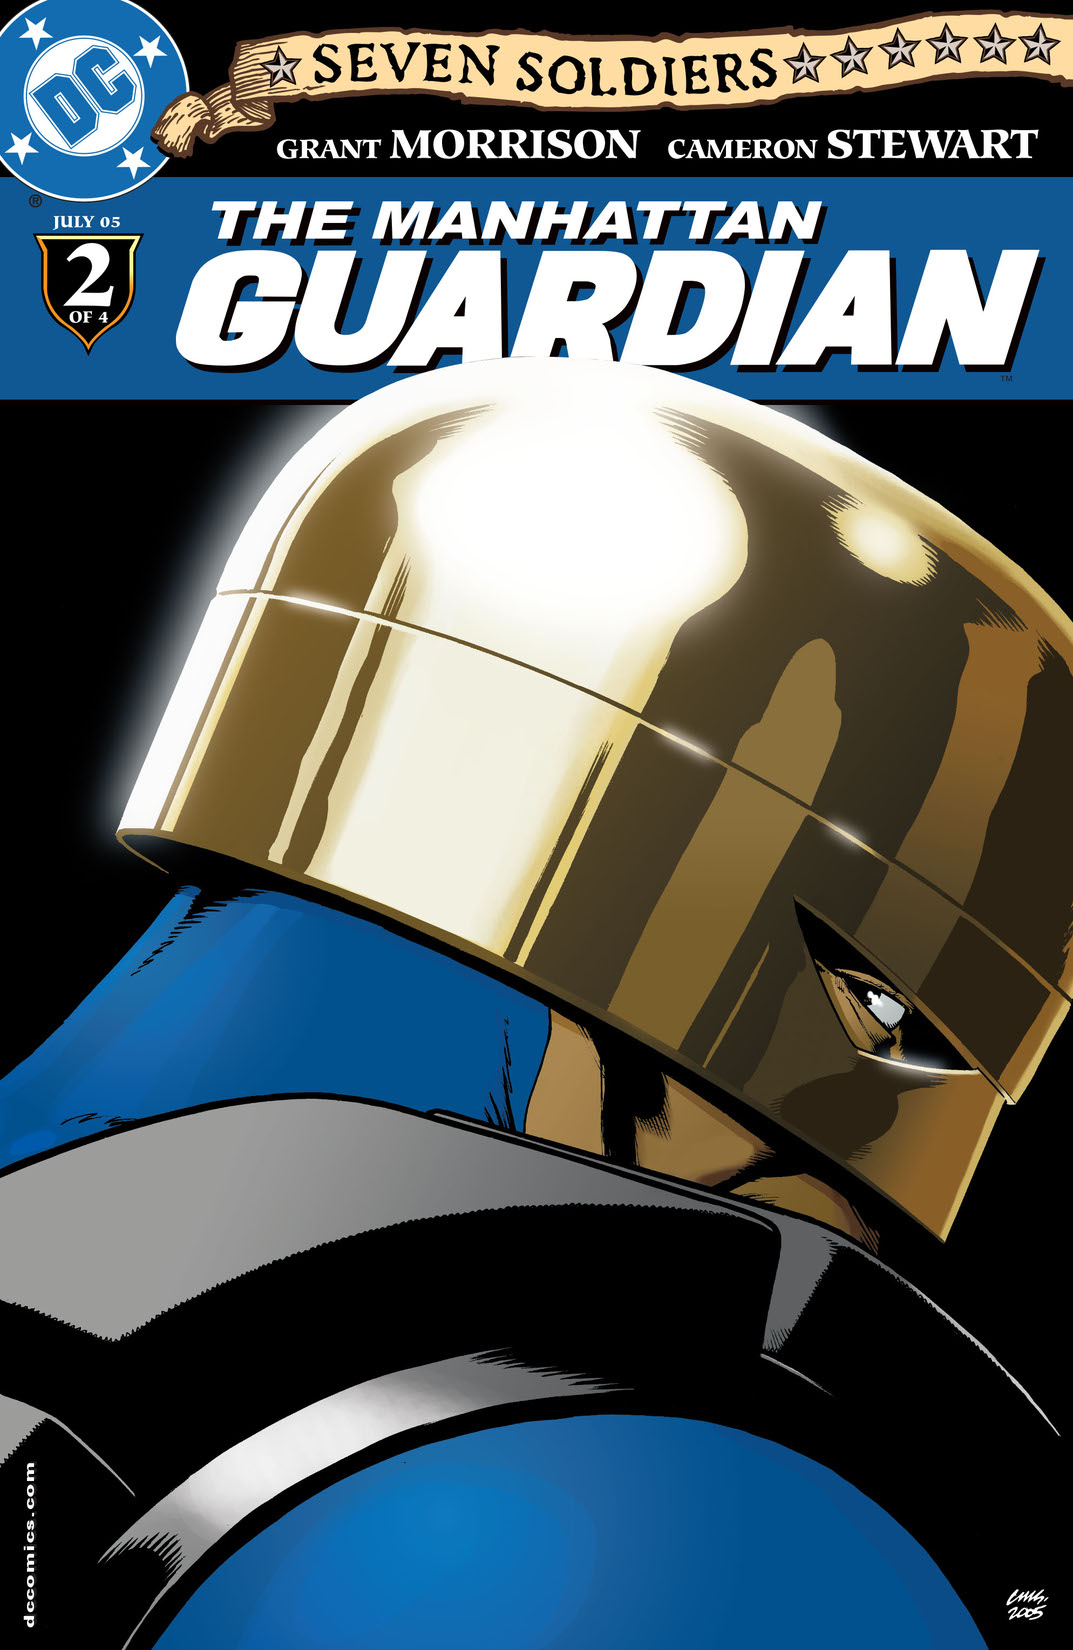 Seven Soldiers: The Manhattan Guardian #2 preview images